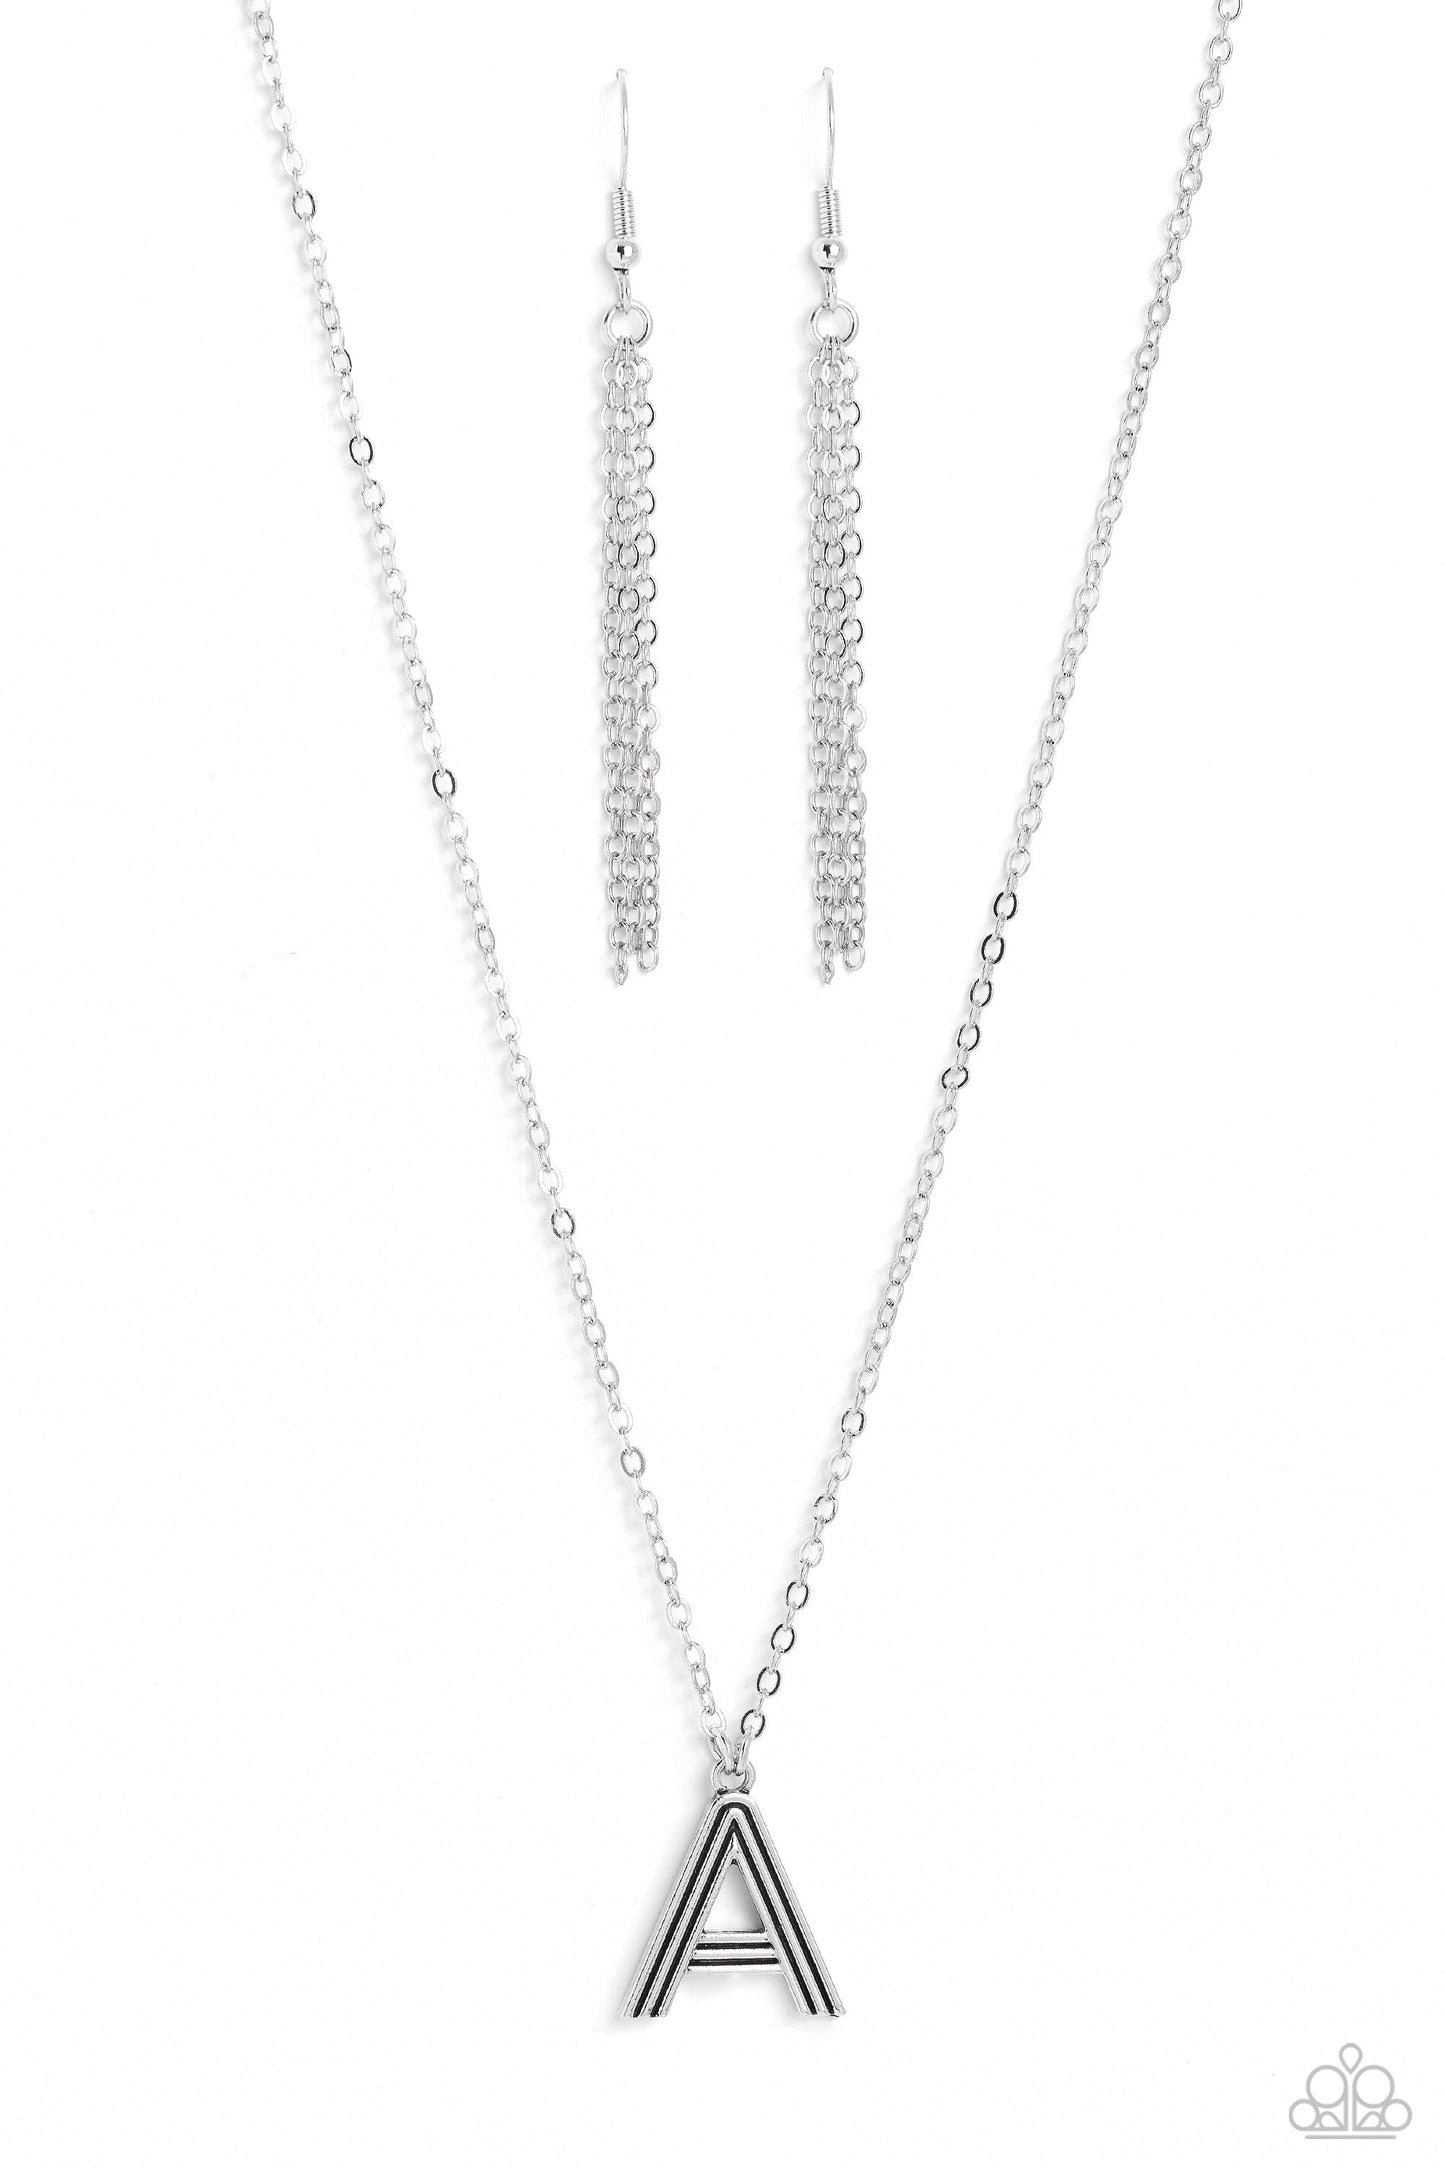 Leave Your Initials - Silver "A" Pendant Paparazzi Necklace & matching earrings